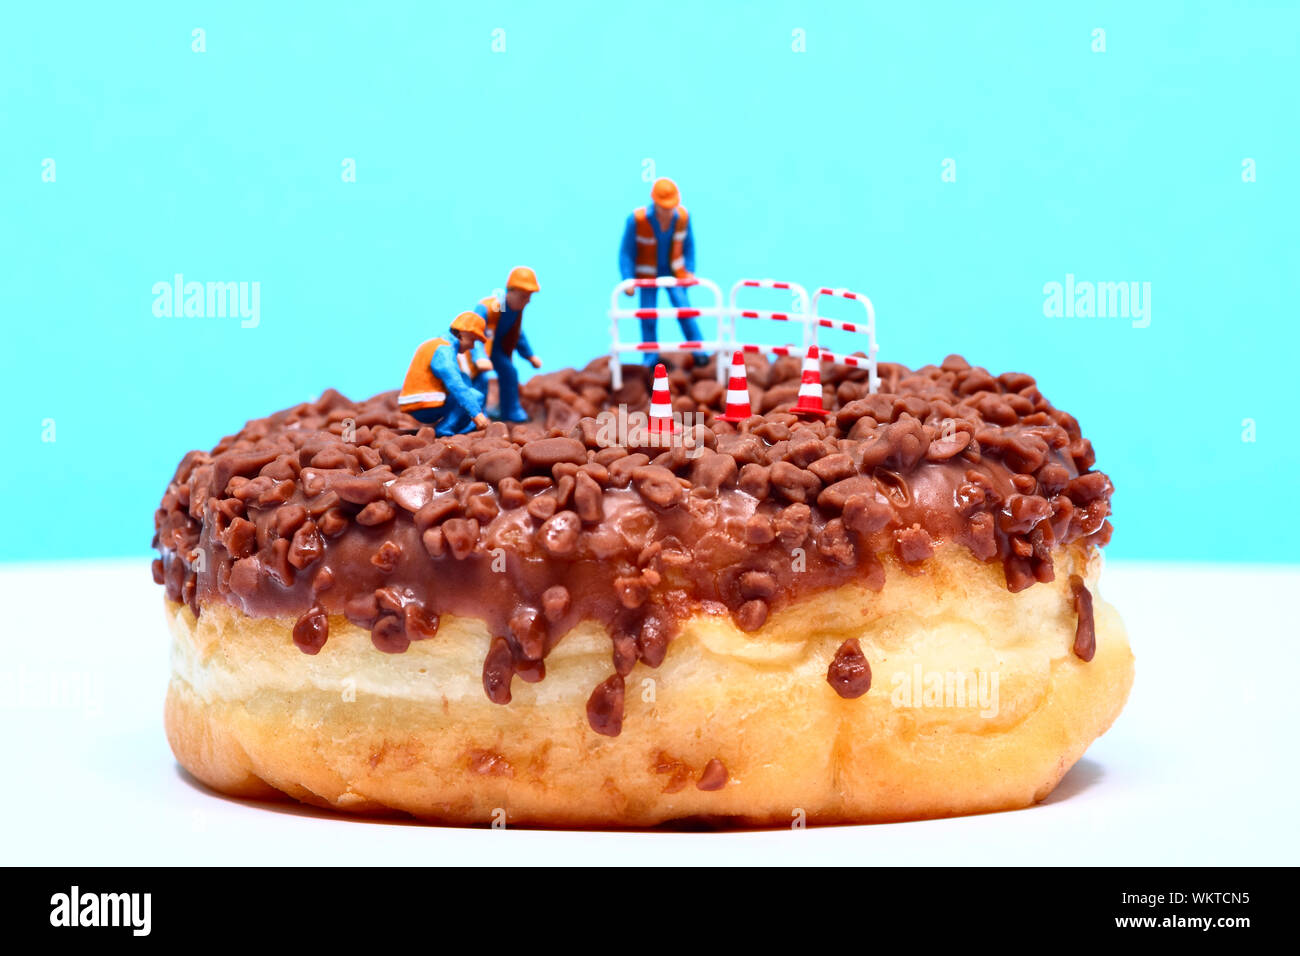 Conceptual image of a miniature figure workmen stood on a chocolate doughnut looking down the centre hole Stock Photo